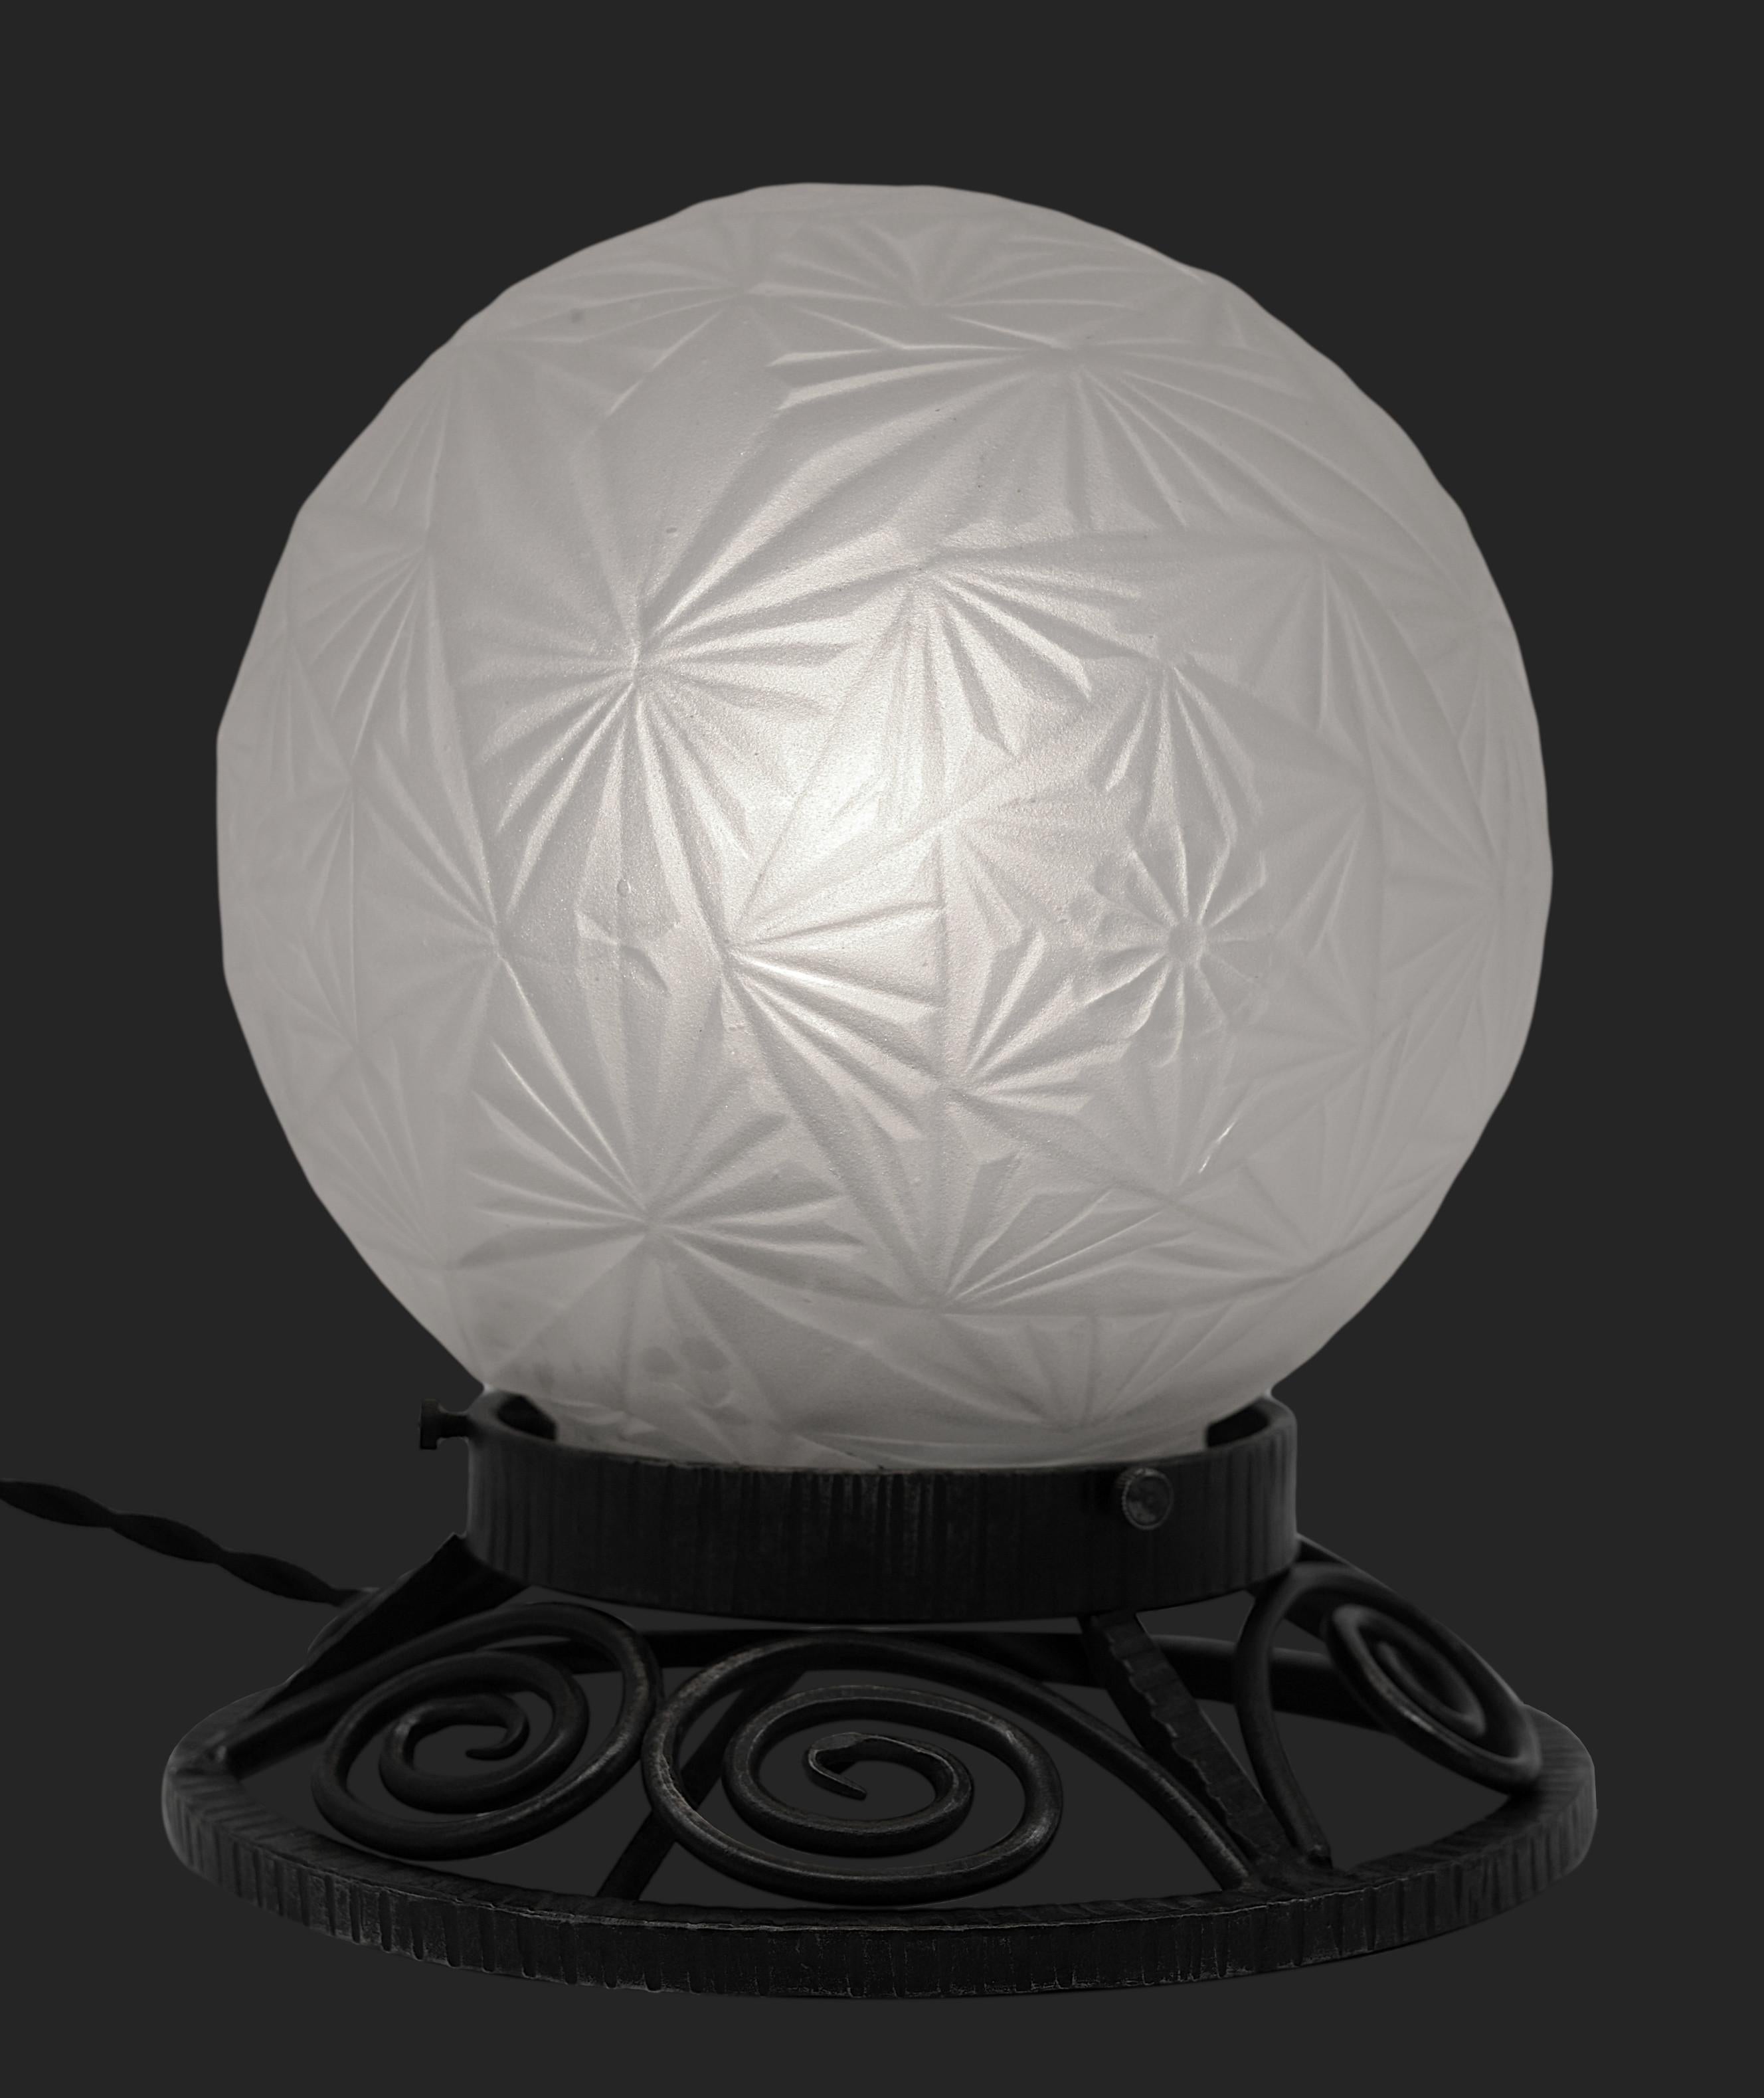 French Art Deco table lamp by Societe Normande de Verreries Sonover, 11 rue Nationale, Aumale, France. Frosted glass shade on its wrought-iron base. Floral decor. Height: 6.7